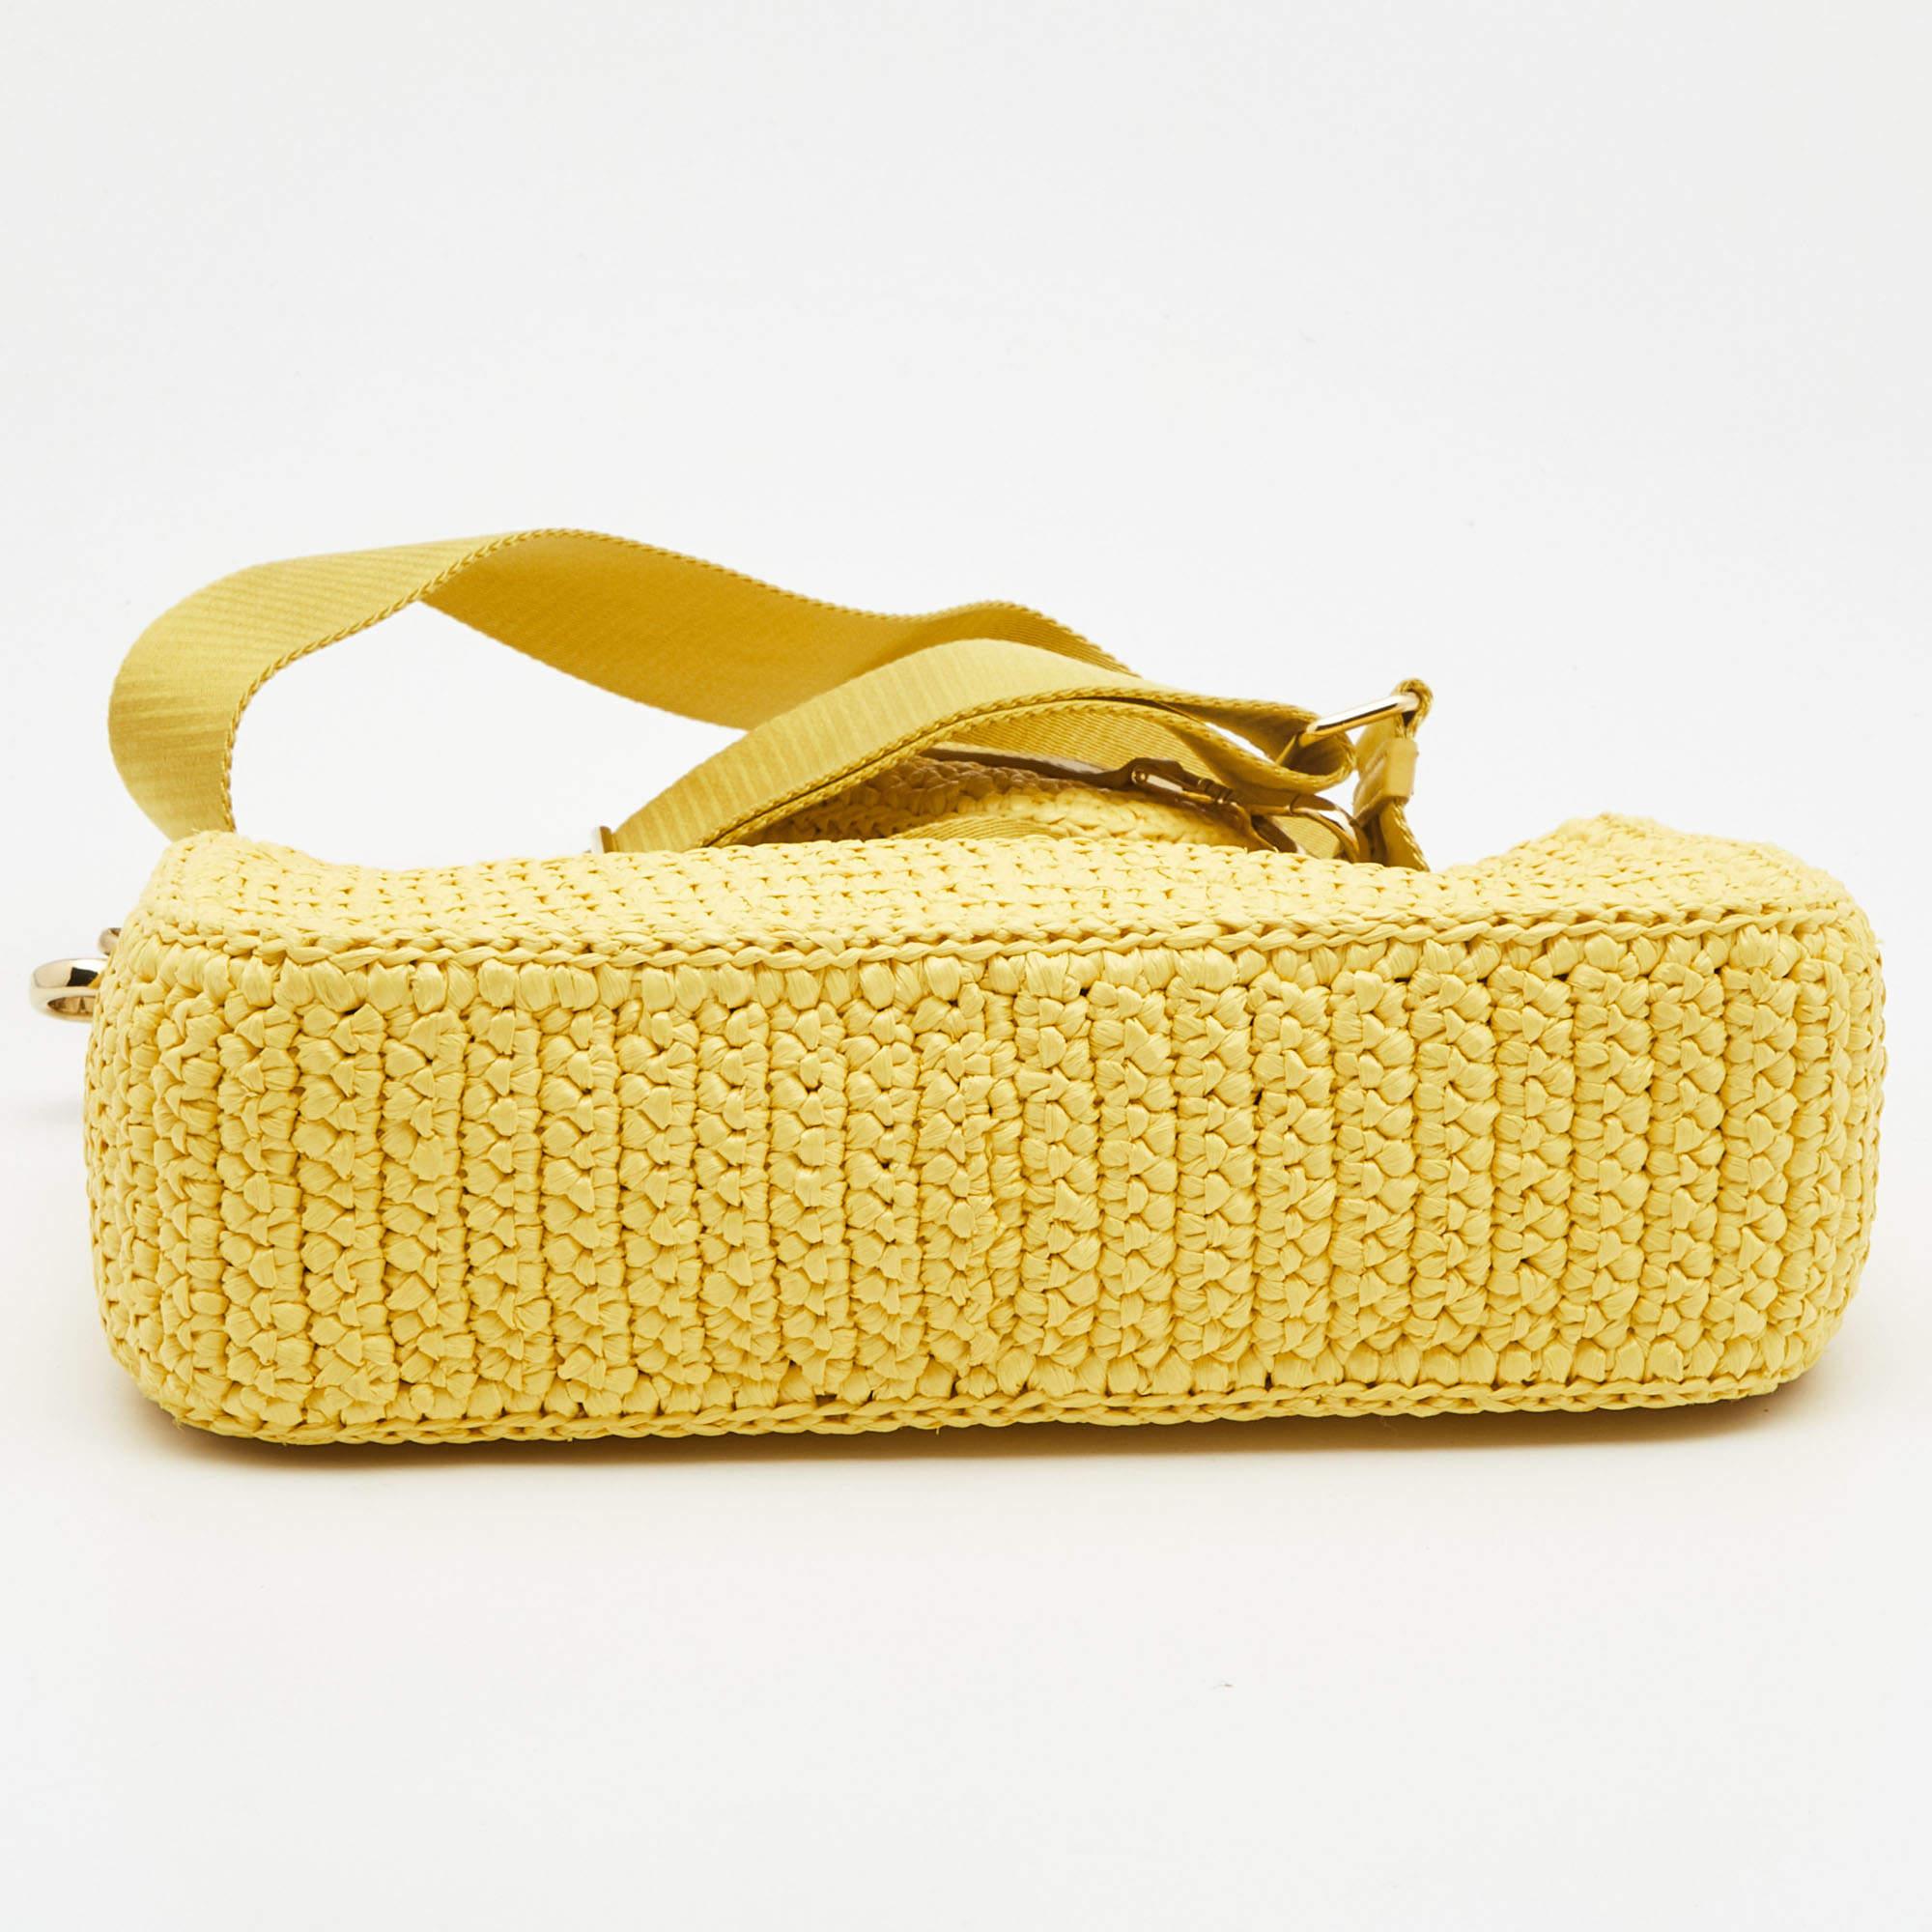 Prada Yellow Raffia and Leather Re-Edition 2005 Baguette Bag 1